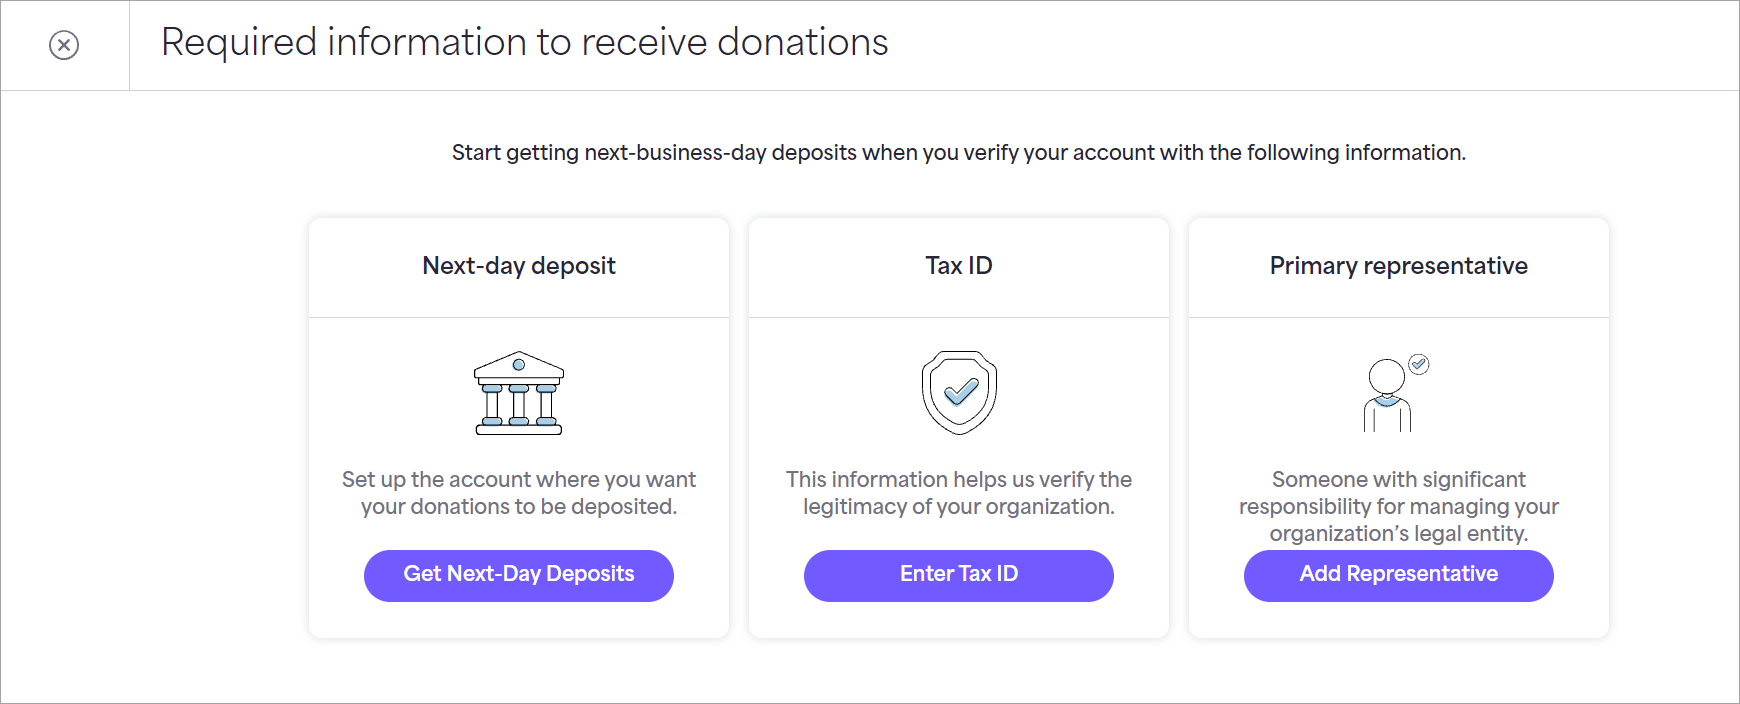 gas-onboarding-required-info-receive-donations.png